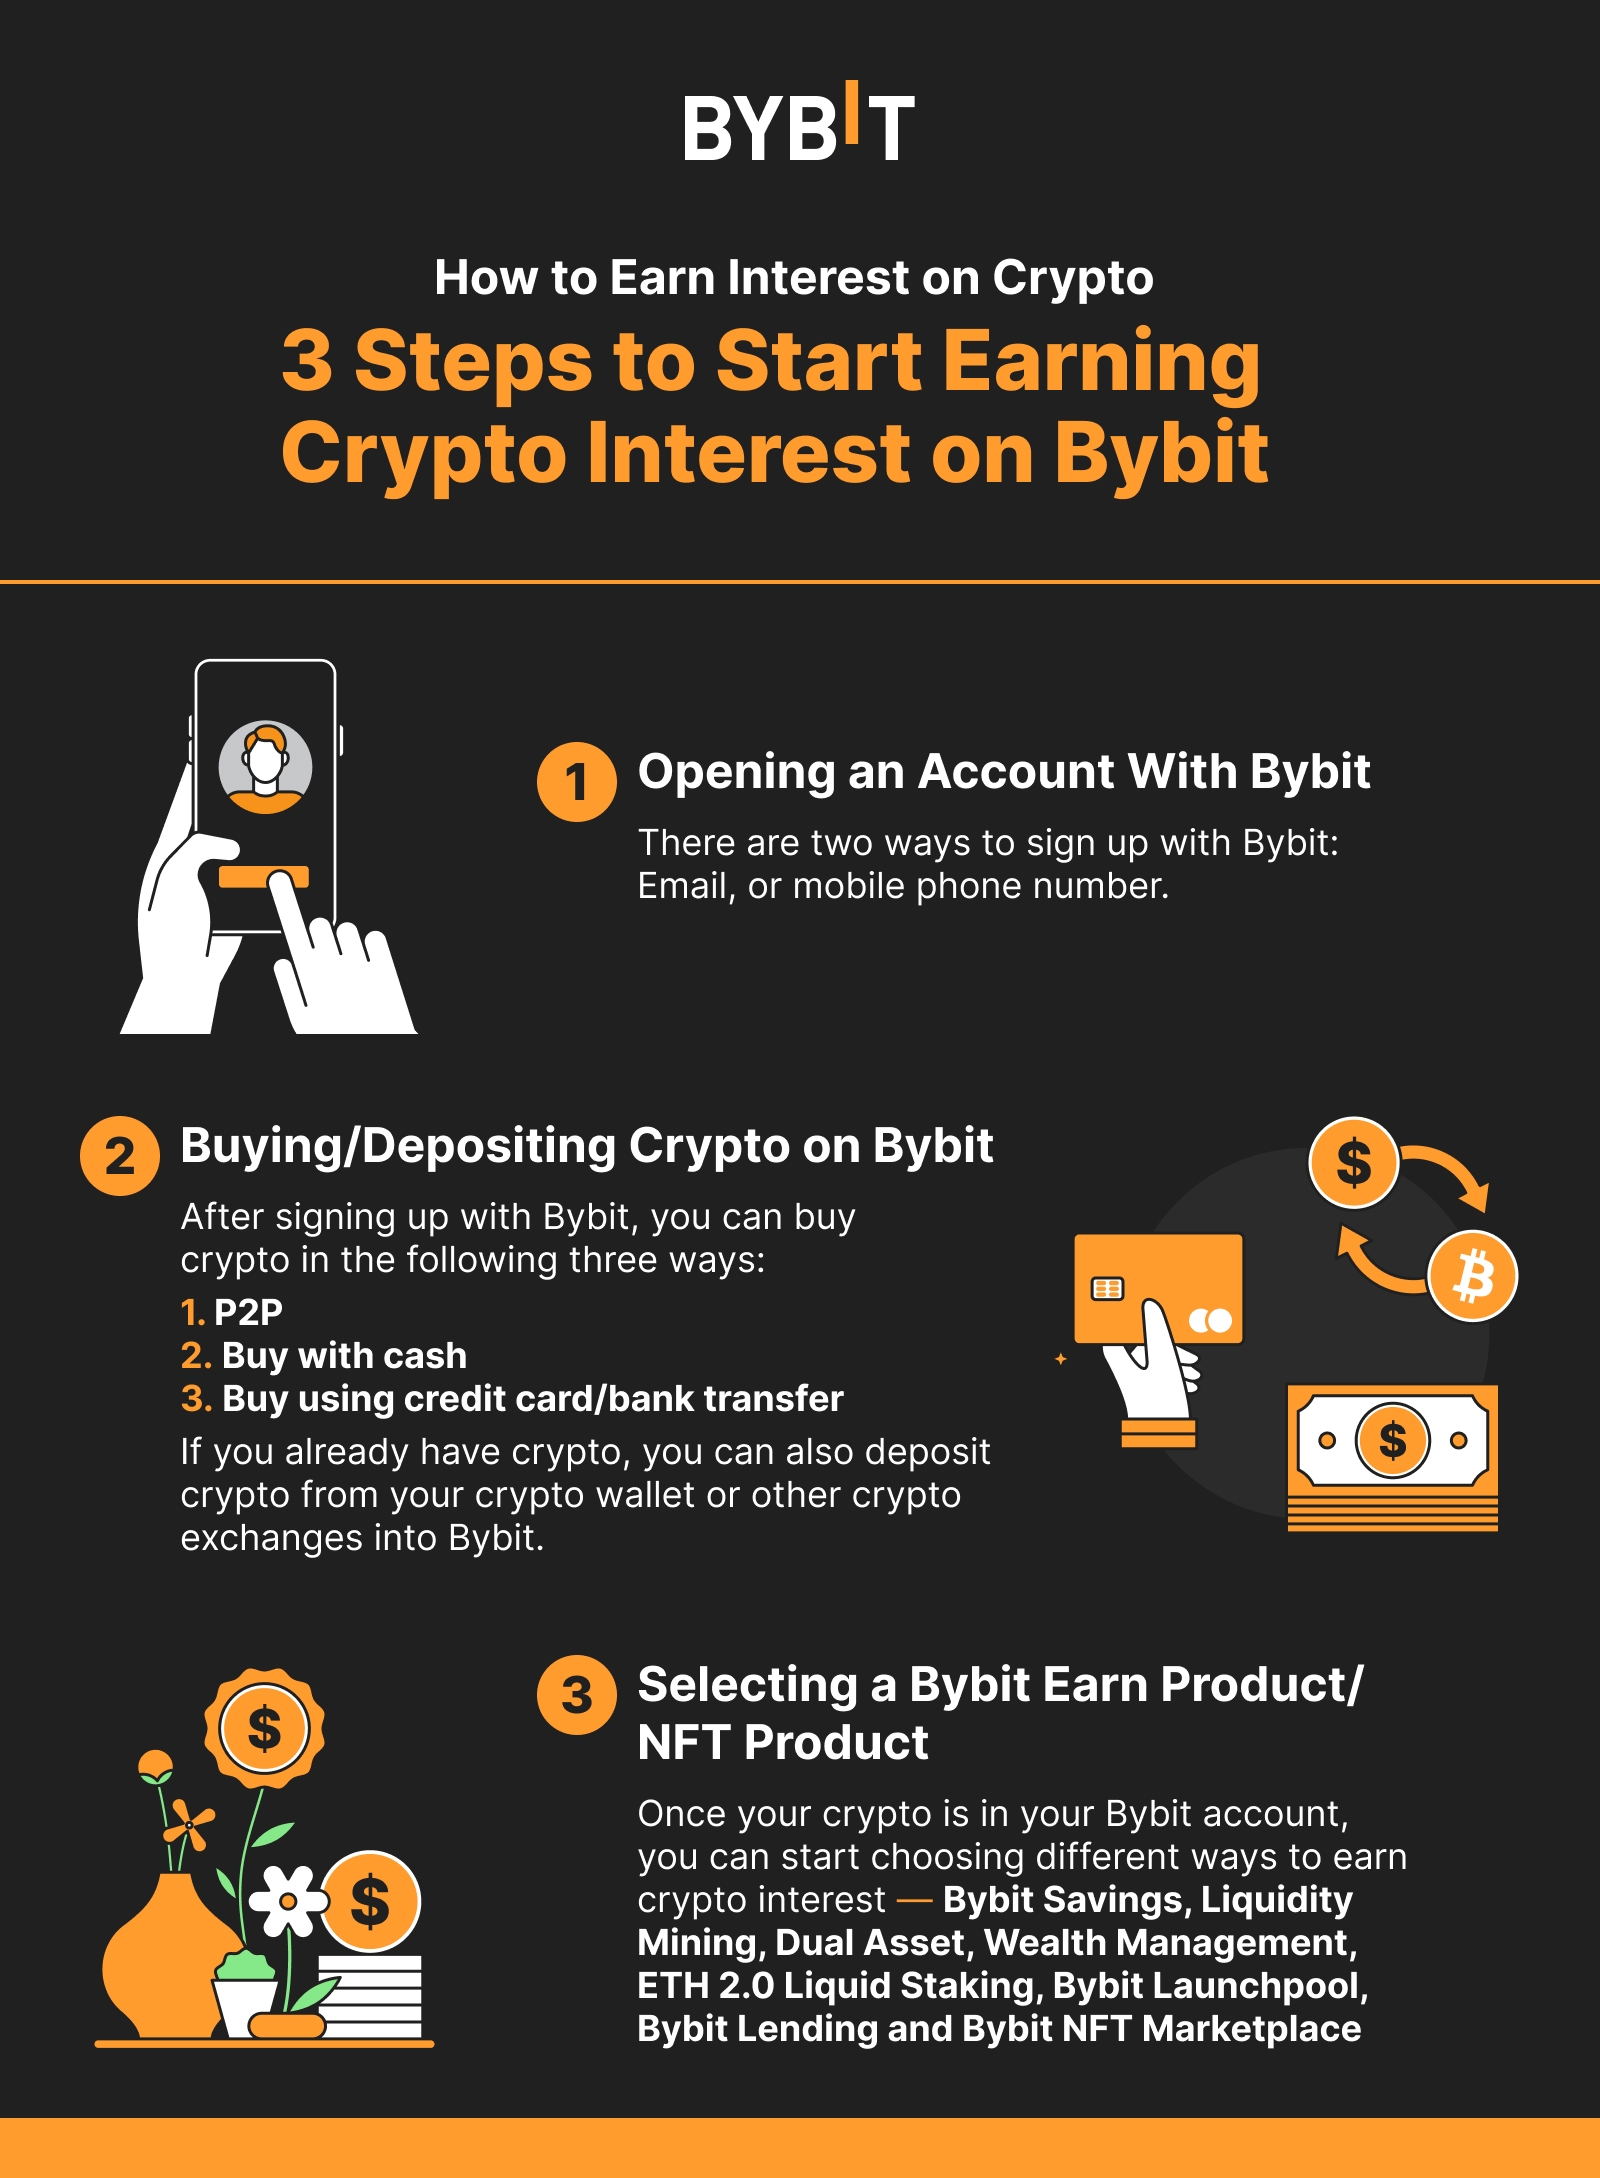 3 steps to start earning crypto interest on Bybit